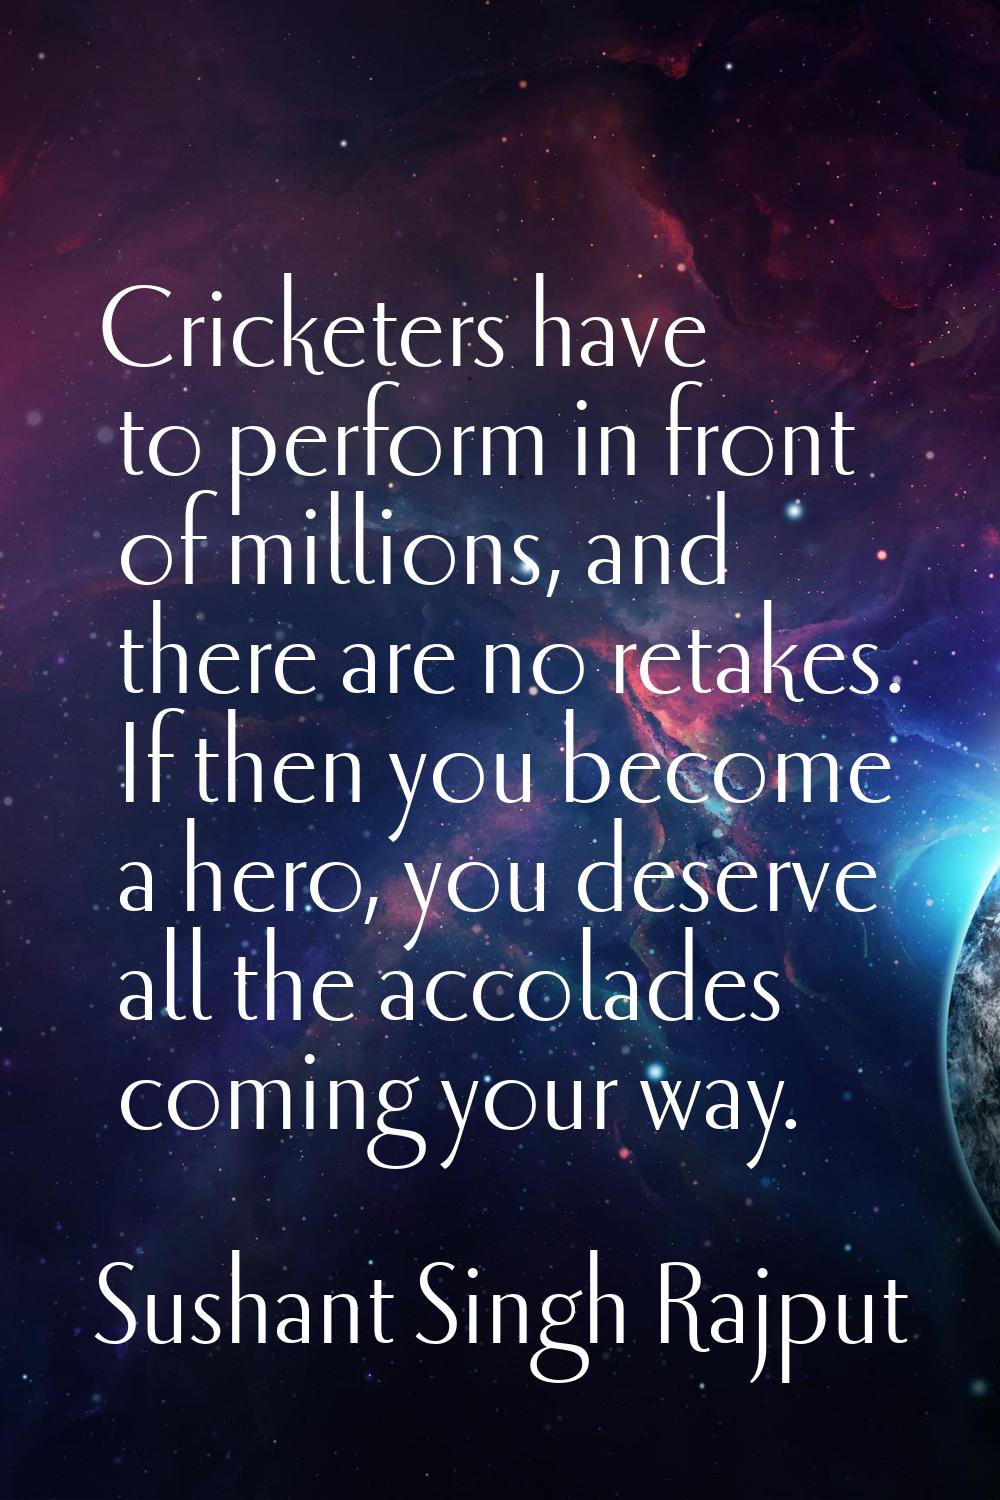 Cricketers have to perform in front of millions, and there are no retakes. If then you become a her